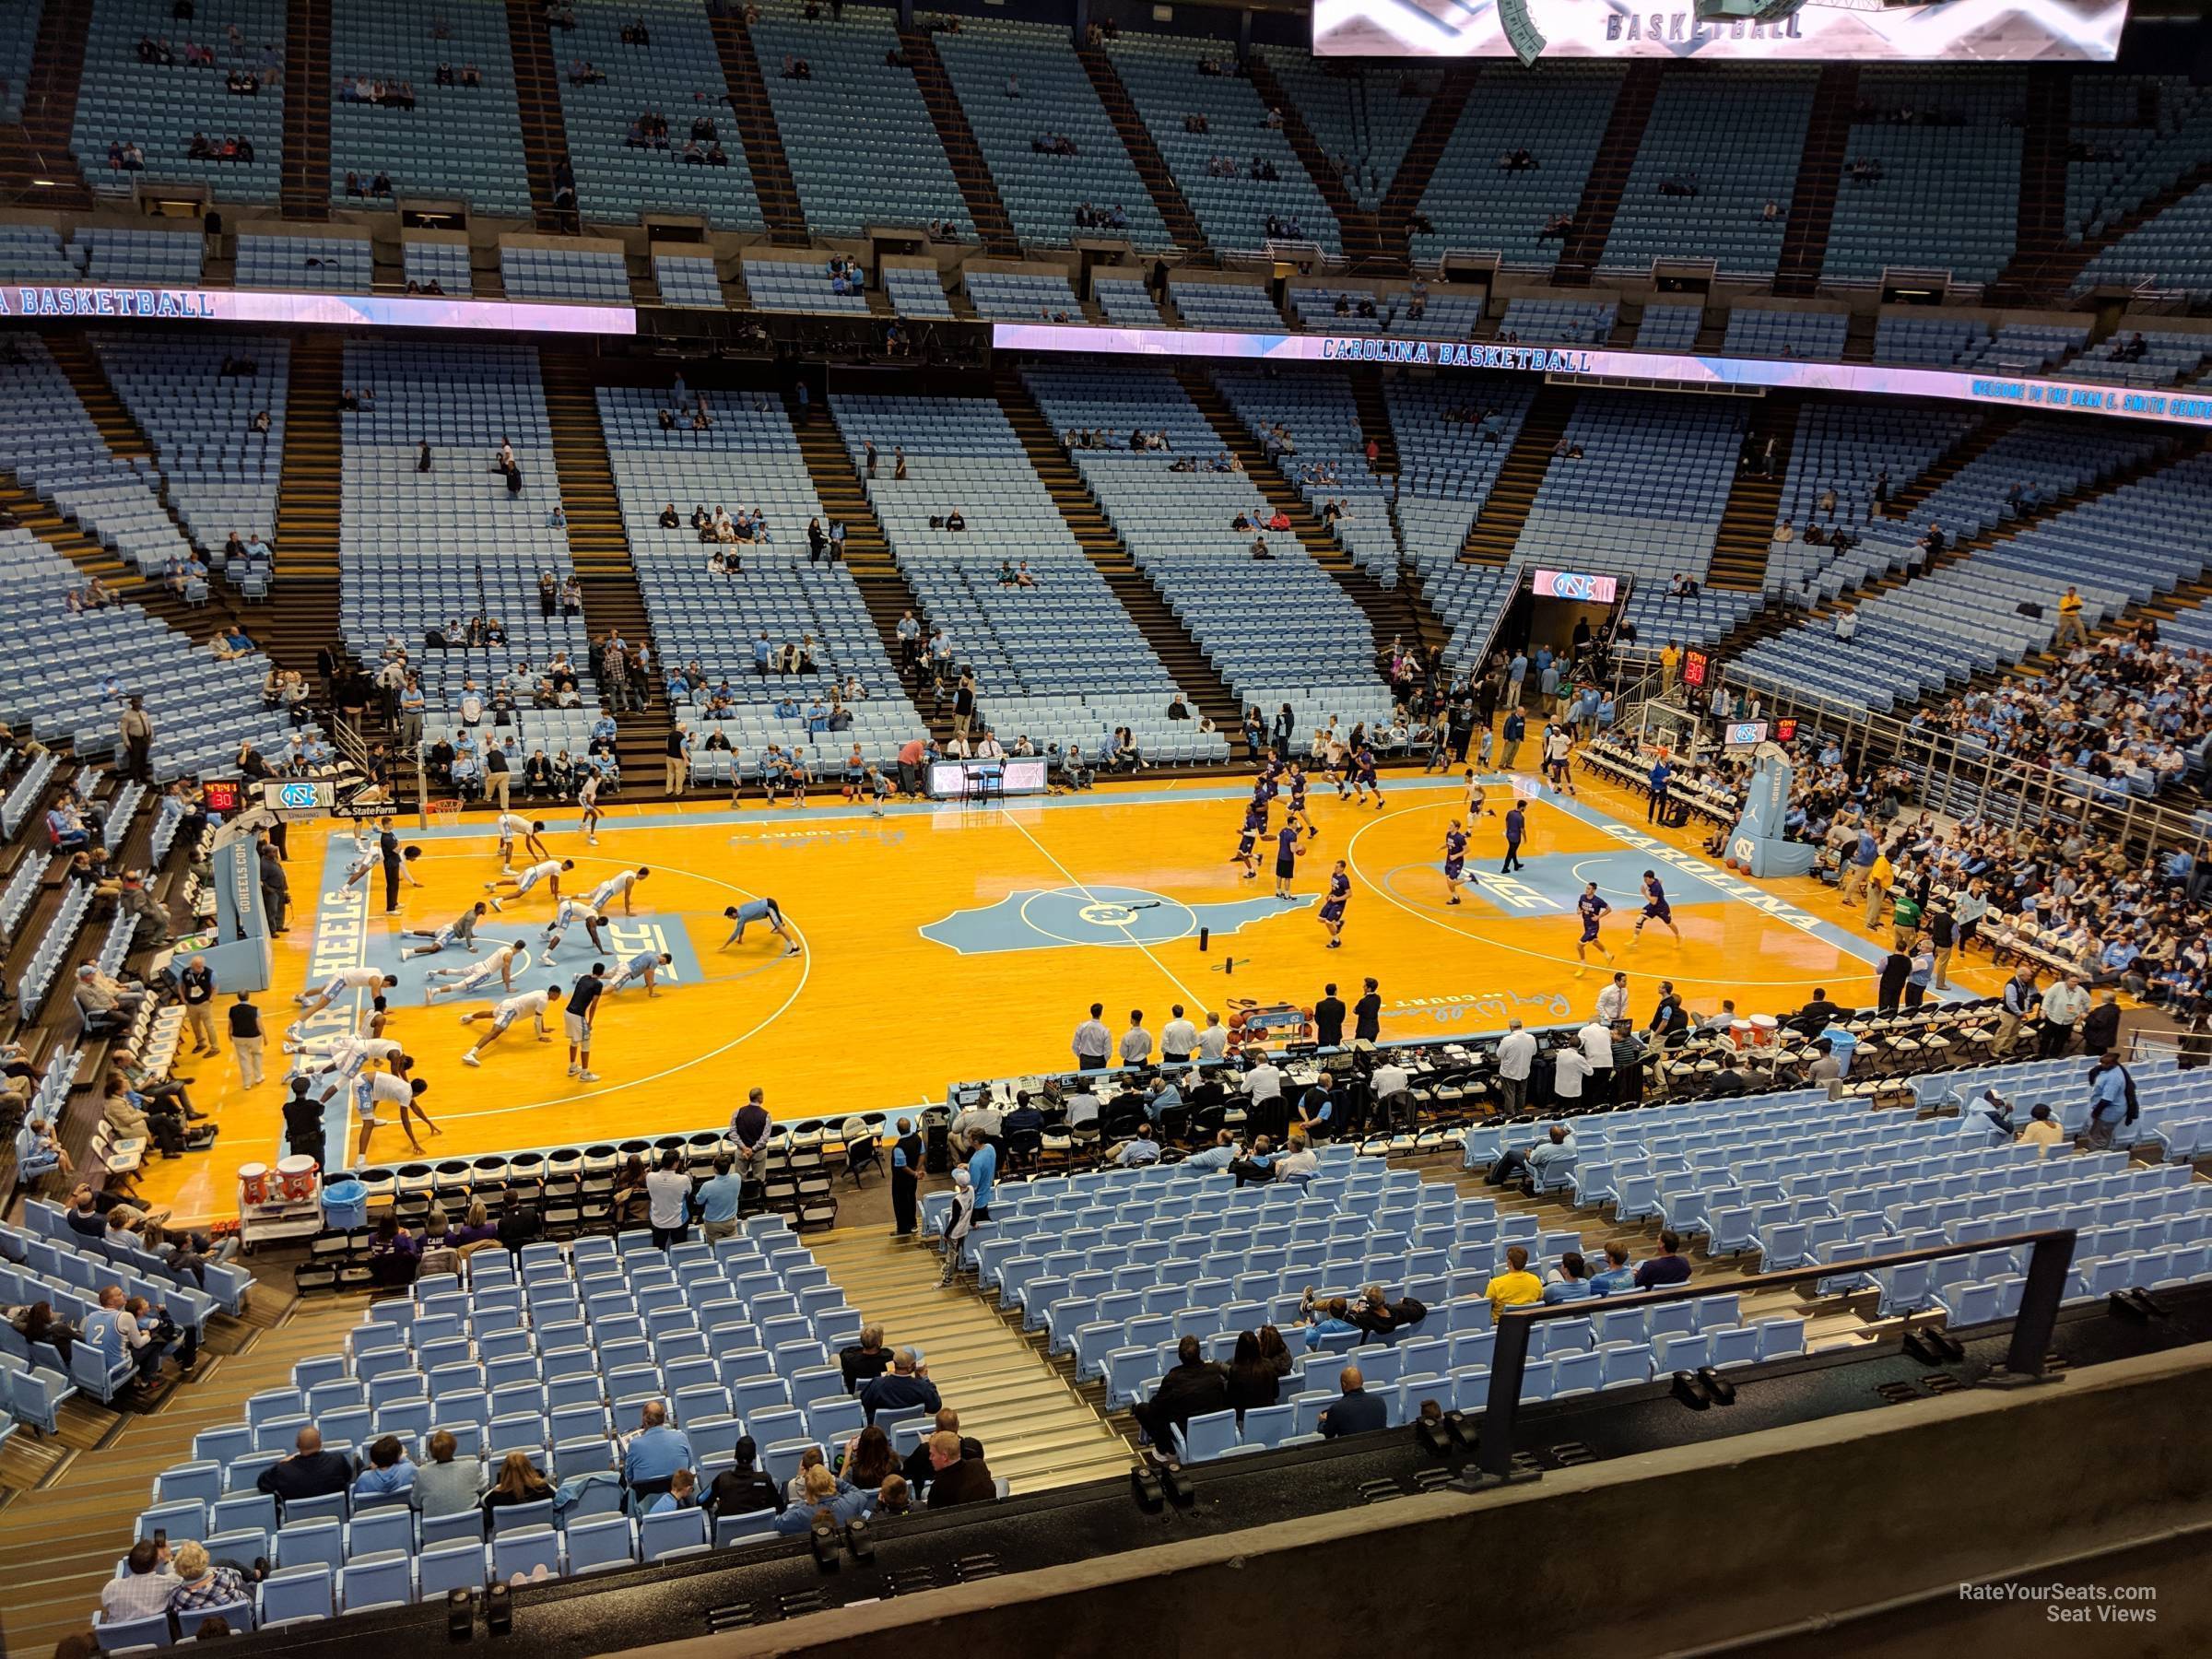 section 207, row c seat view  - dean smith center